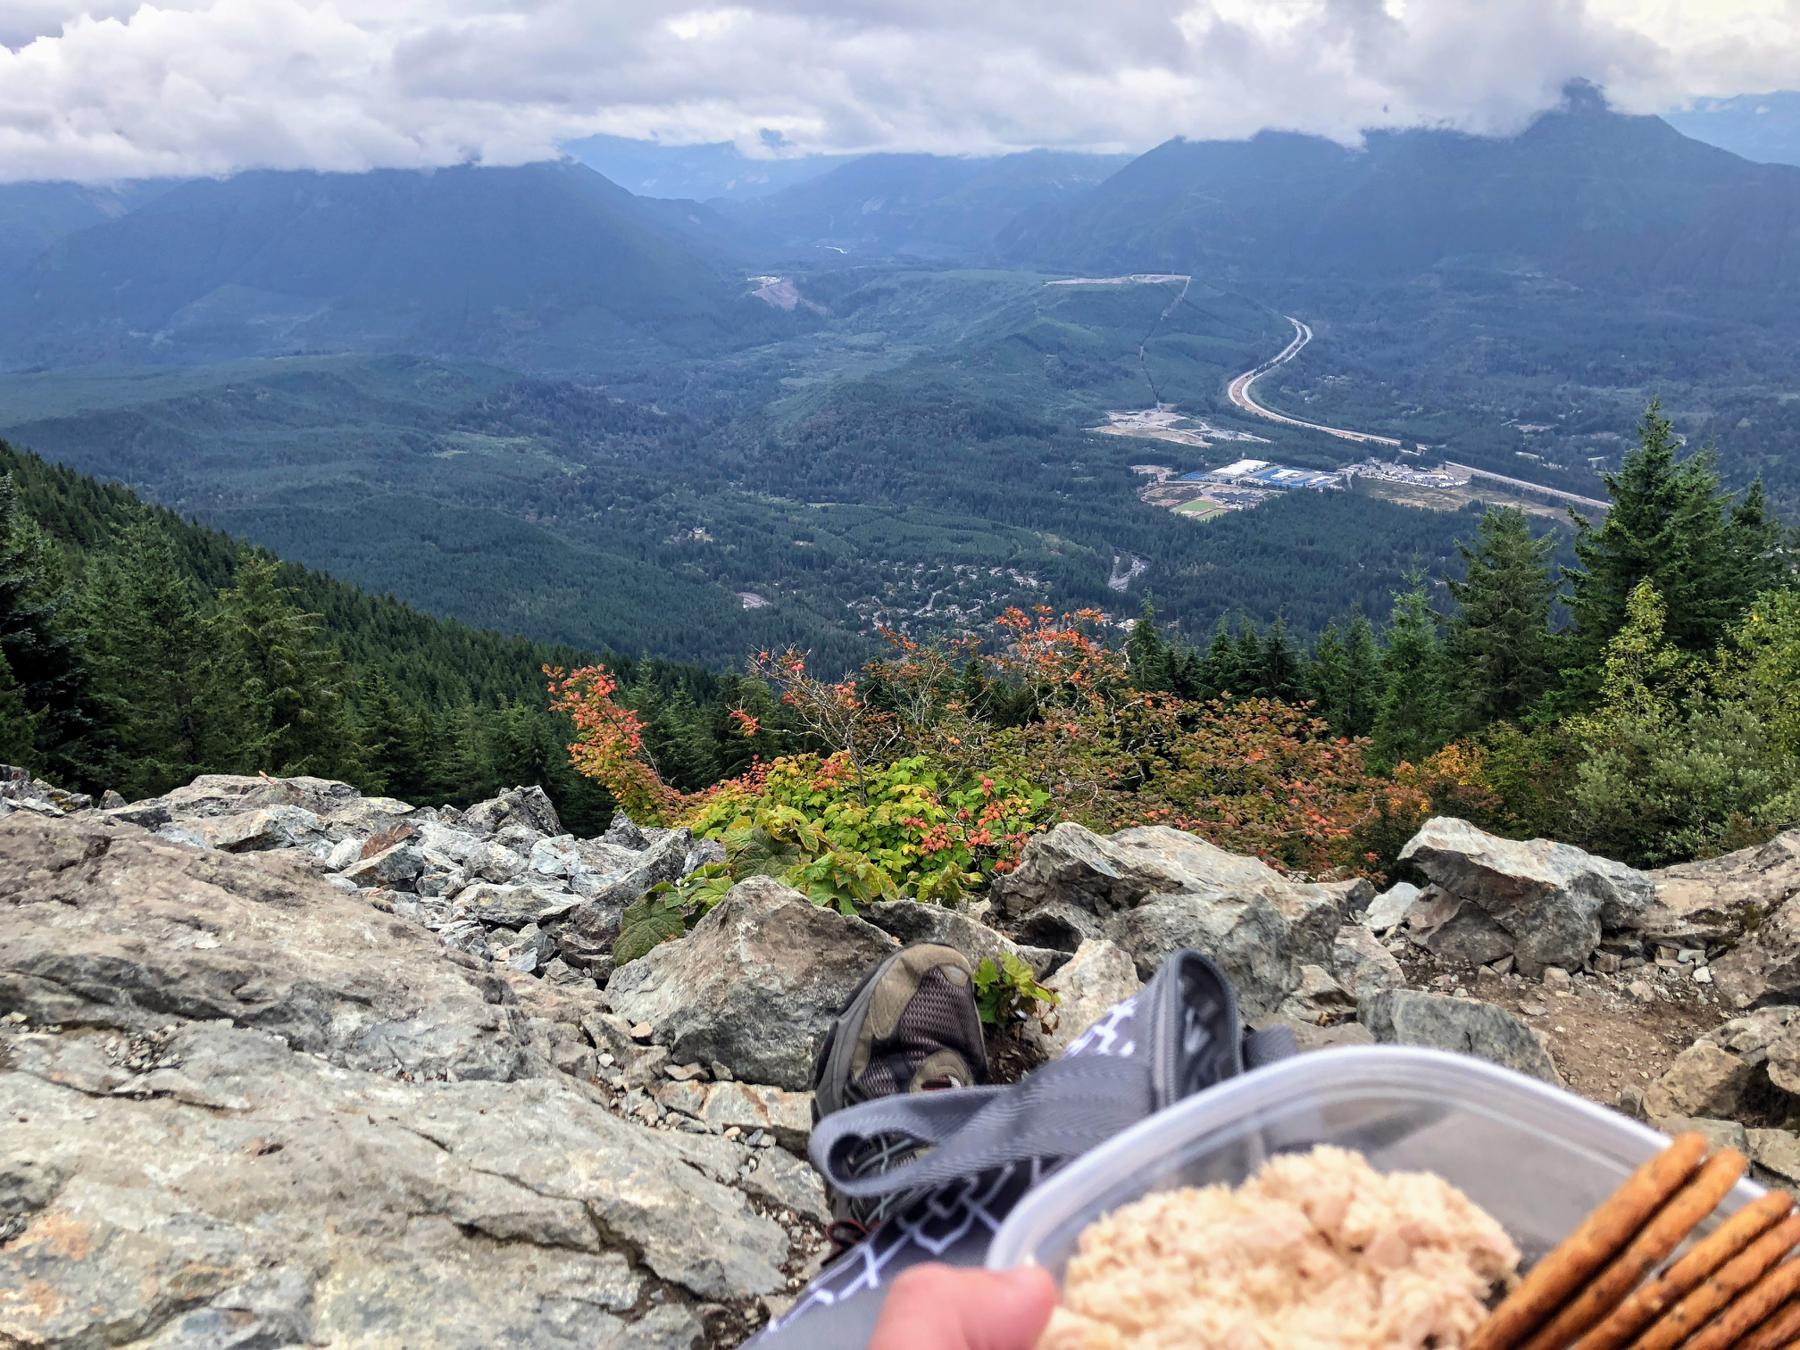 Eating lunch and looking over Snoqualmie